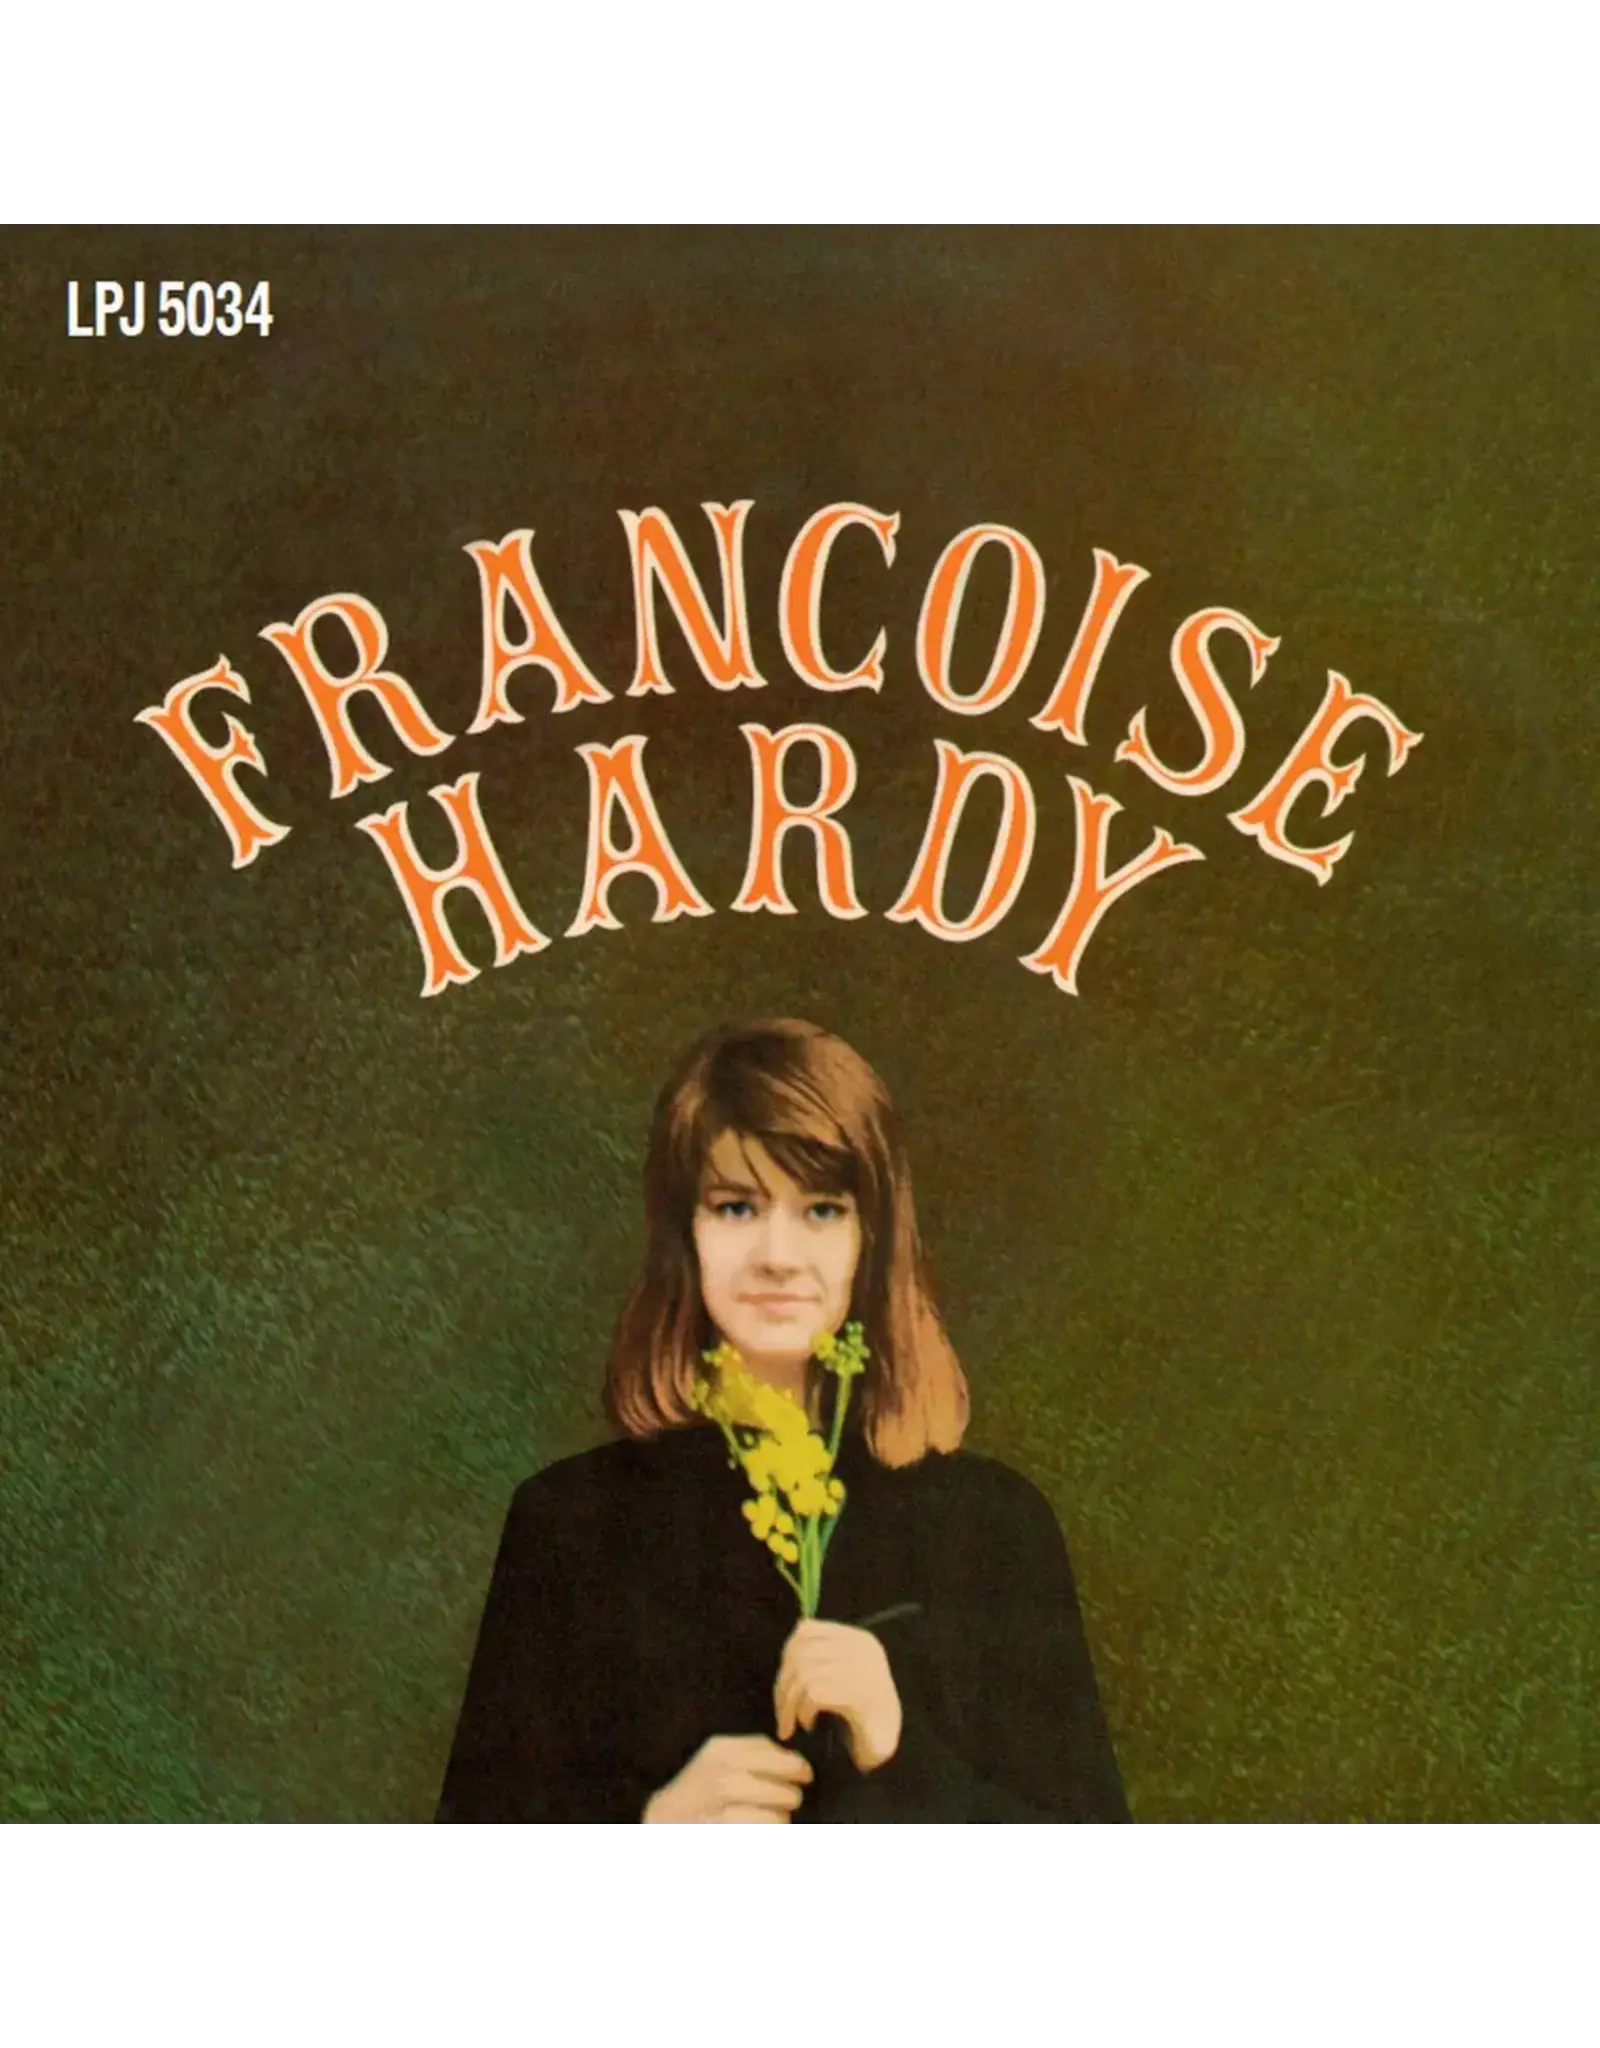 Saar Hardy, Francoise: Francoise Hardy with Ezio Leoni and His Orchestra (Green) LP